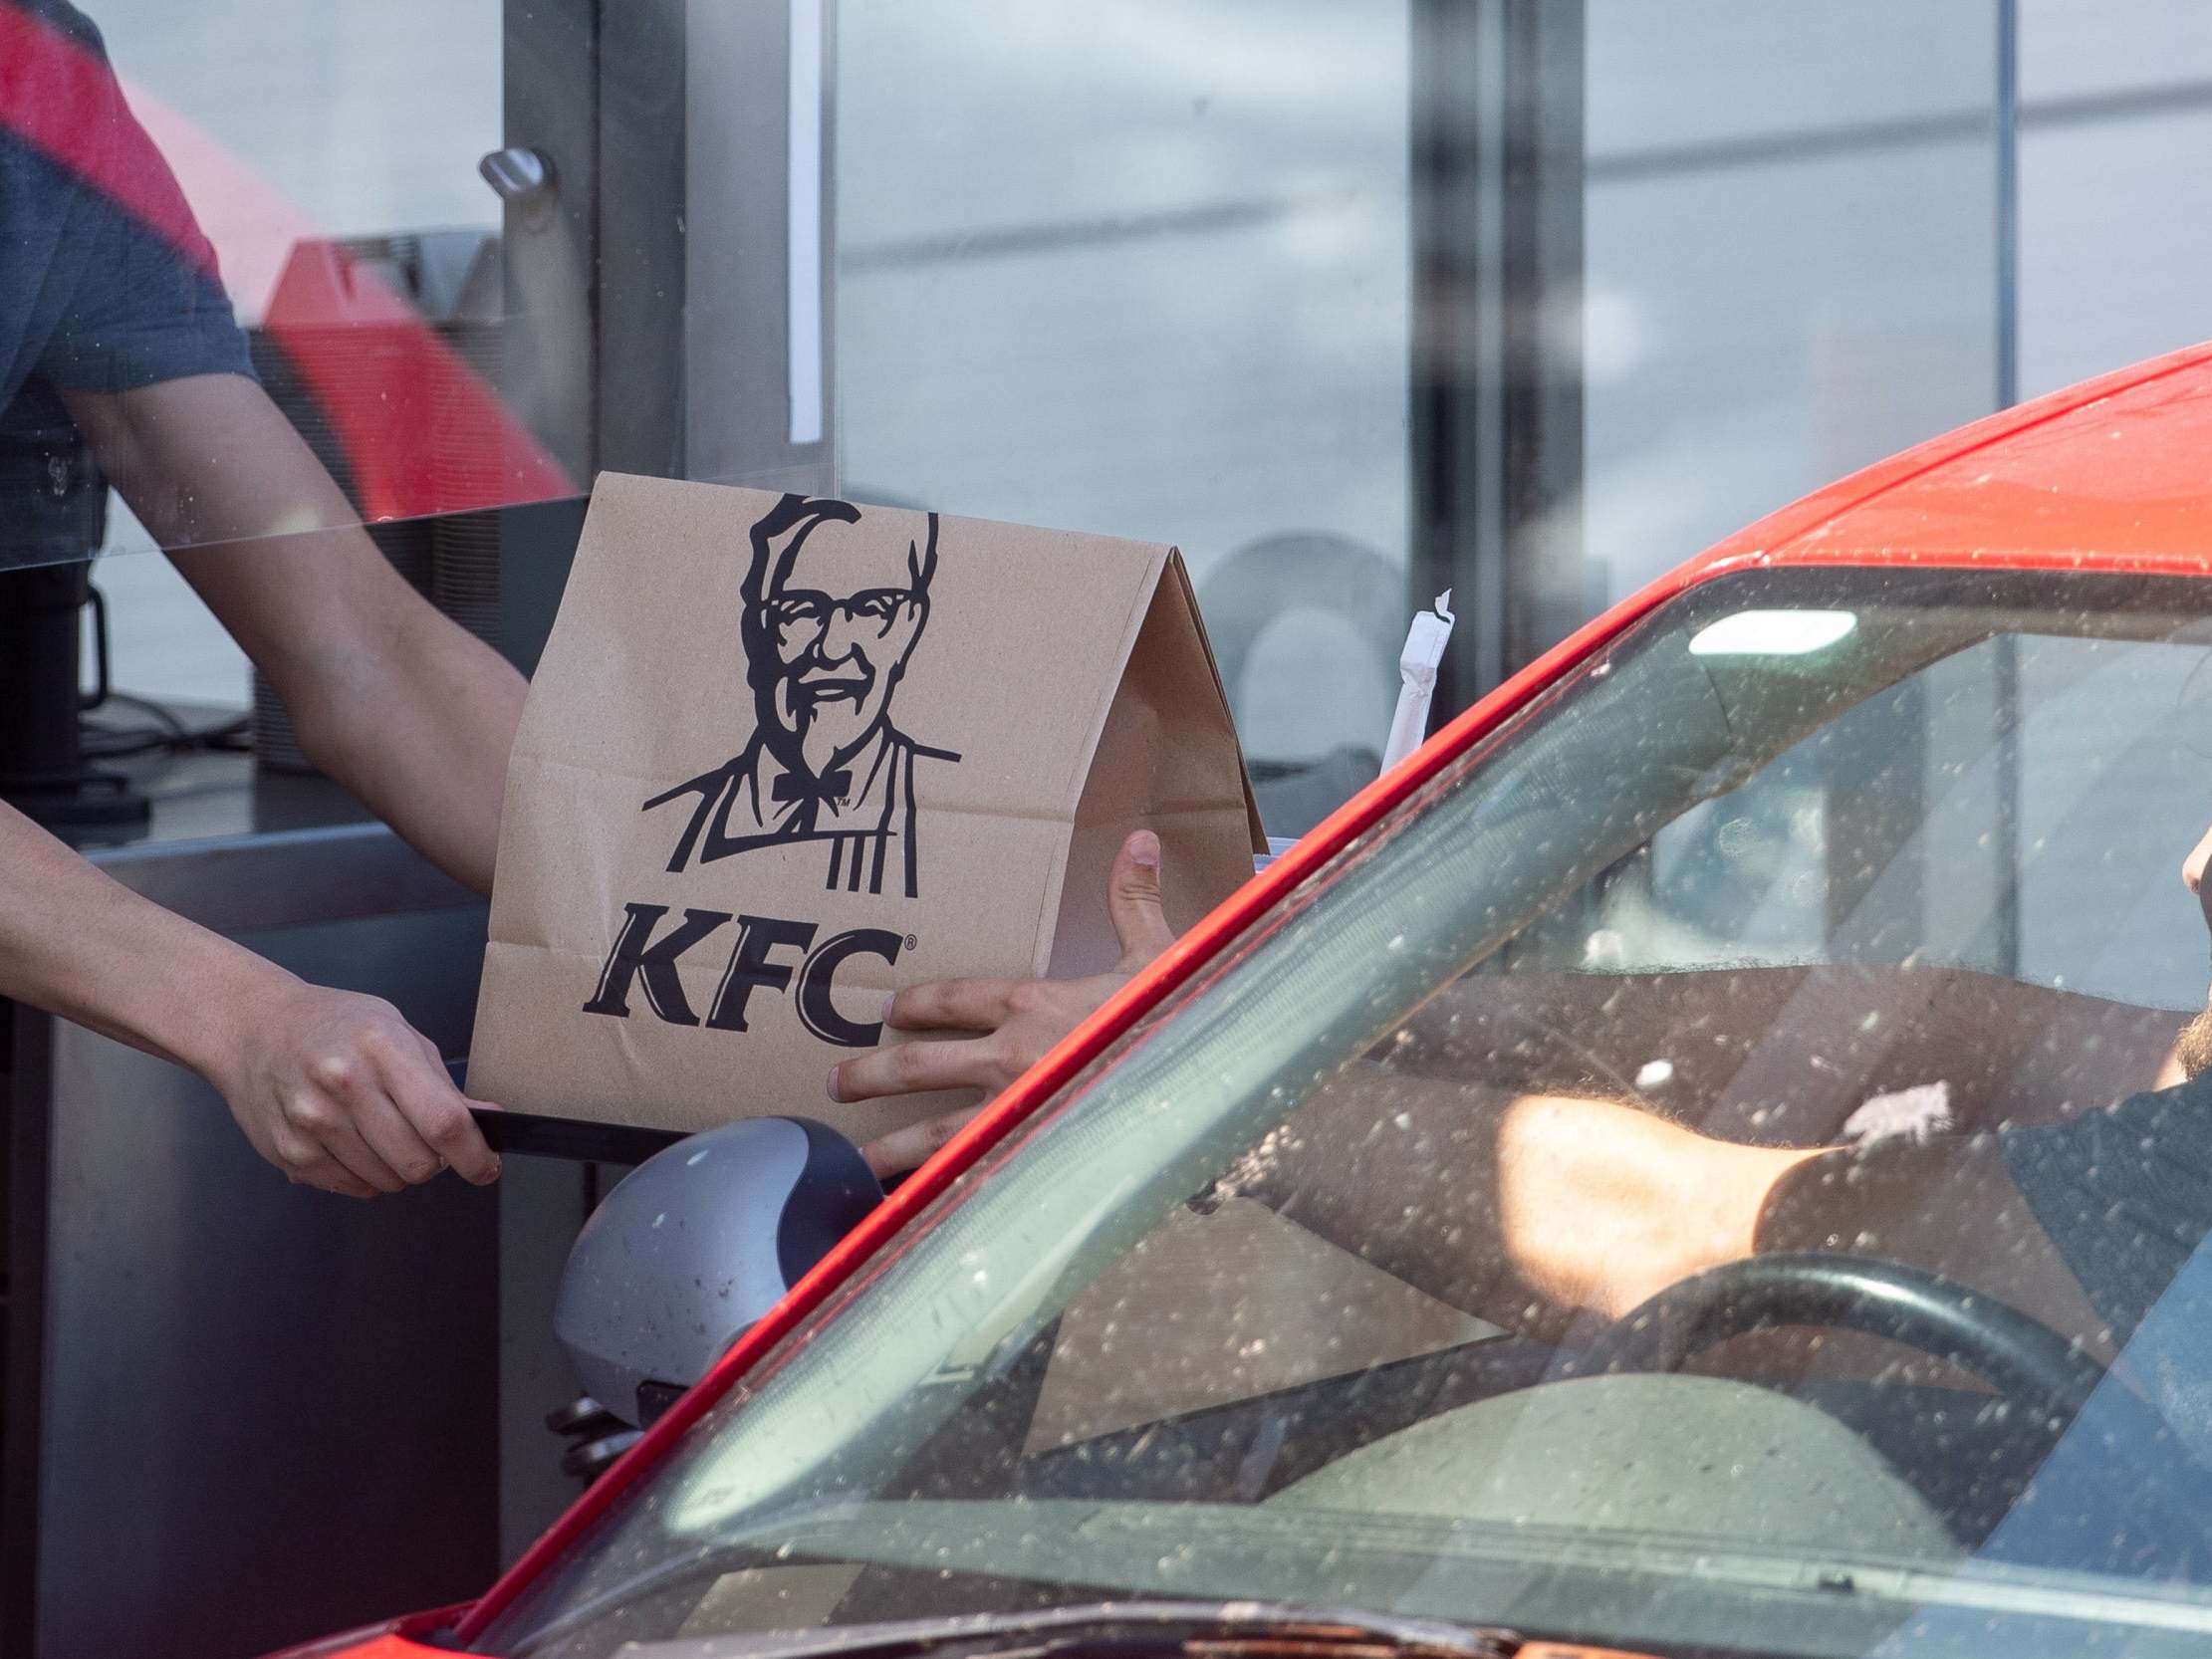 A member of staff hands an order to a customer at a KFC drive-through in Leicester